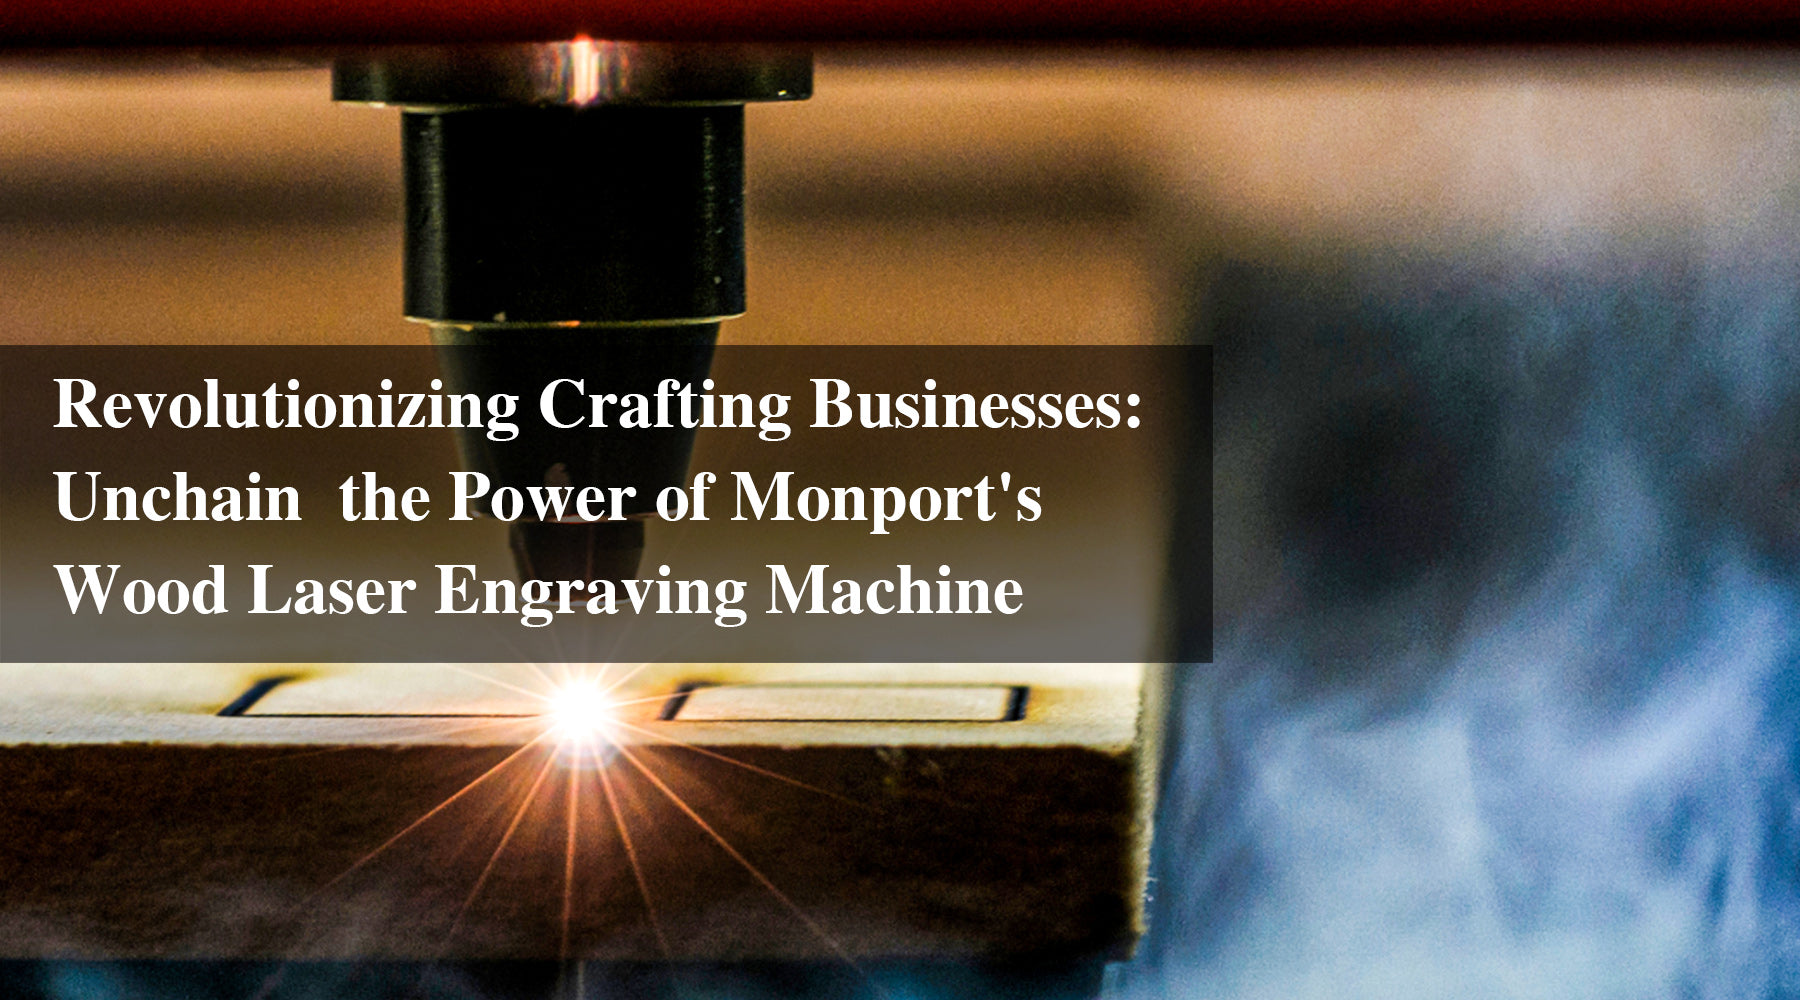 Revolutionizing Crafting Businesses: Unchain the Power of Monport's Wood Laser Engraving Machine